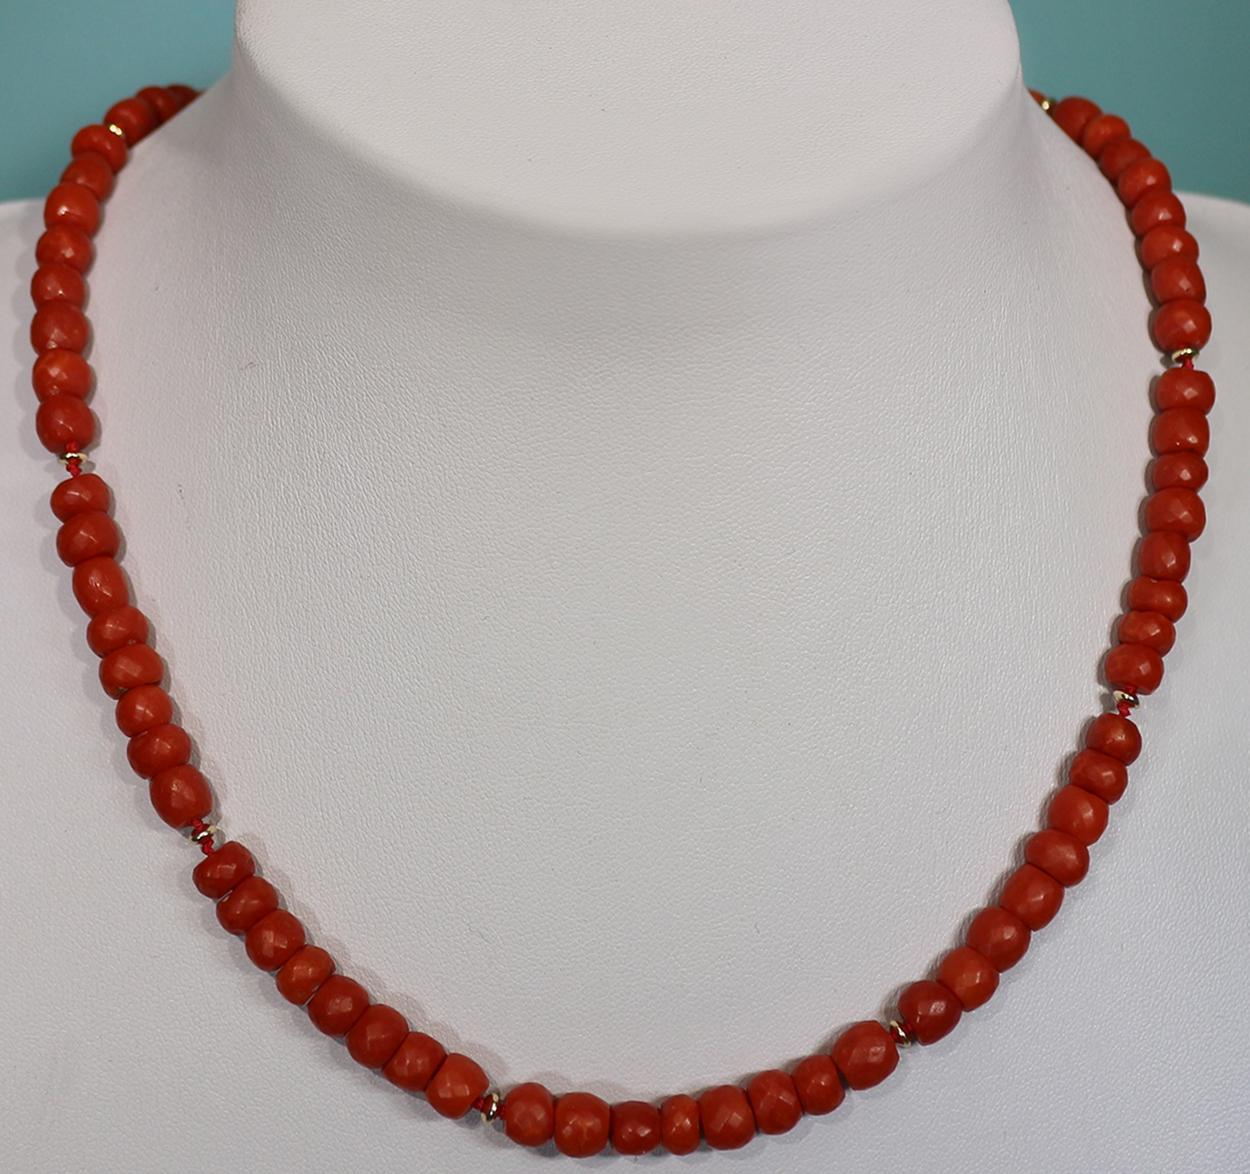 Ball Cut Antique Faceted Mediterranean Sardegna Coral Necklace, 18K Gold Clasp For Sale